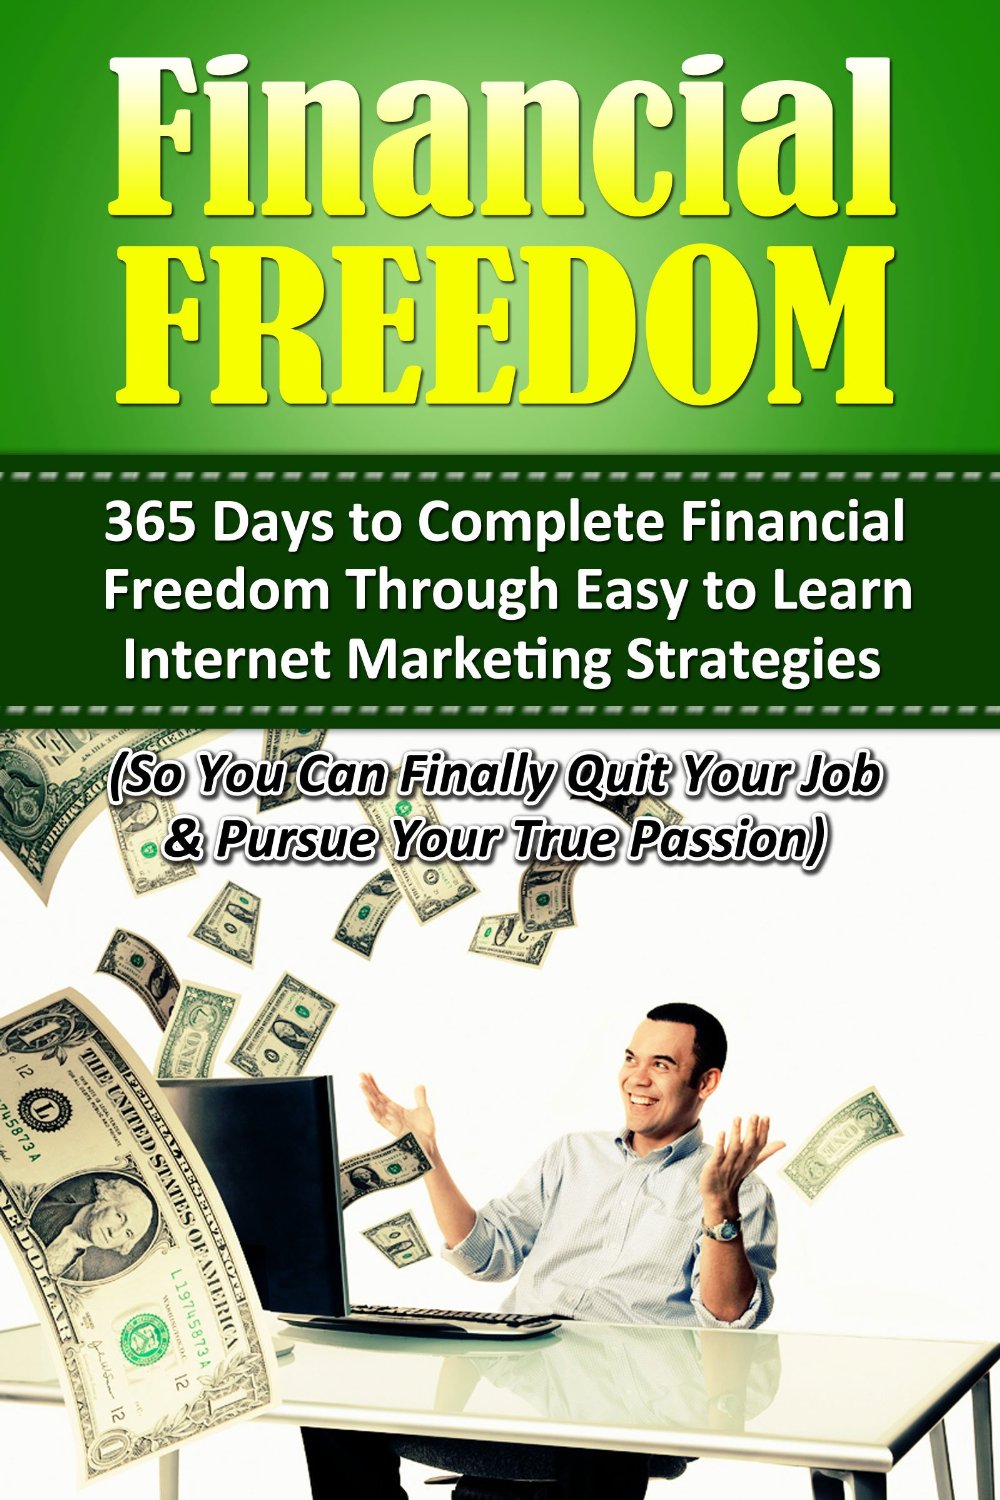 Financial Freedom: 365 Days to Complete Financial Freedom Through Easy to Learn Internet Marketing Strategies (So You Can Finally Quit Your Job & Pursue Your True Passion) by Terry Jones